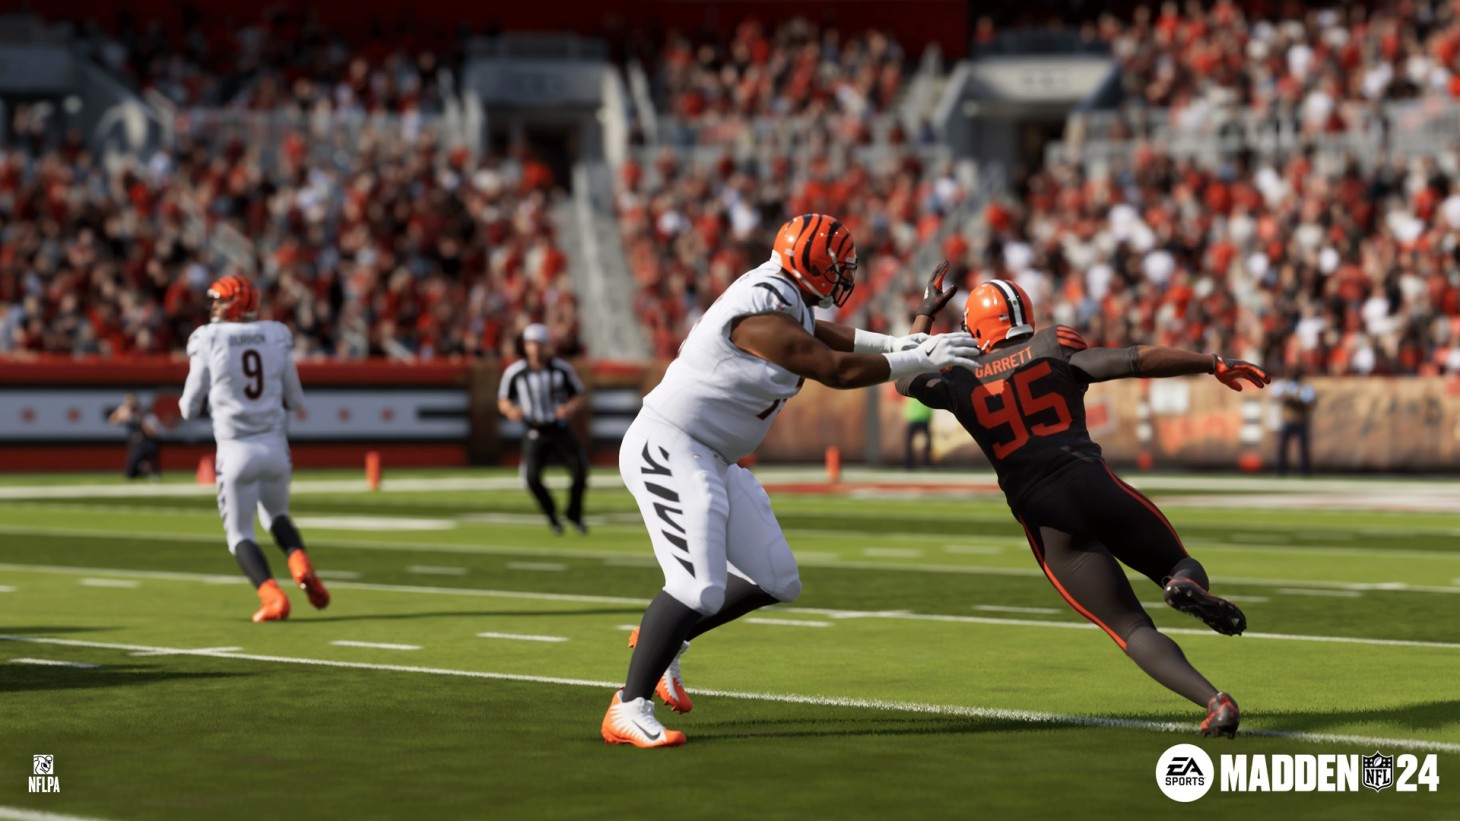 Madden NFL 23 – 15 Features You Need to Know About